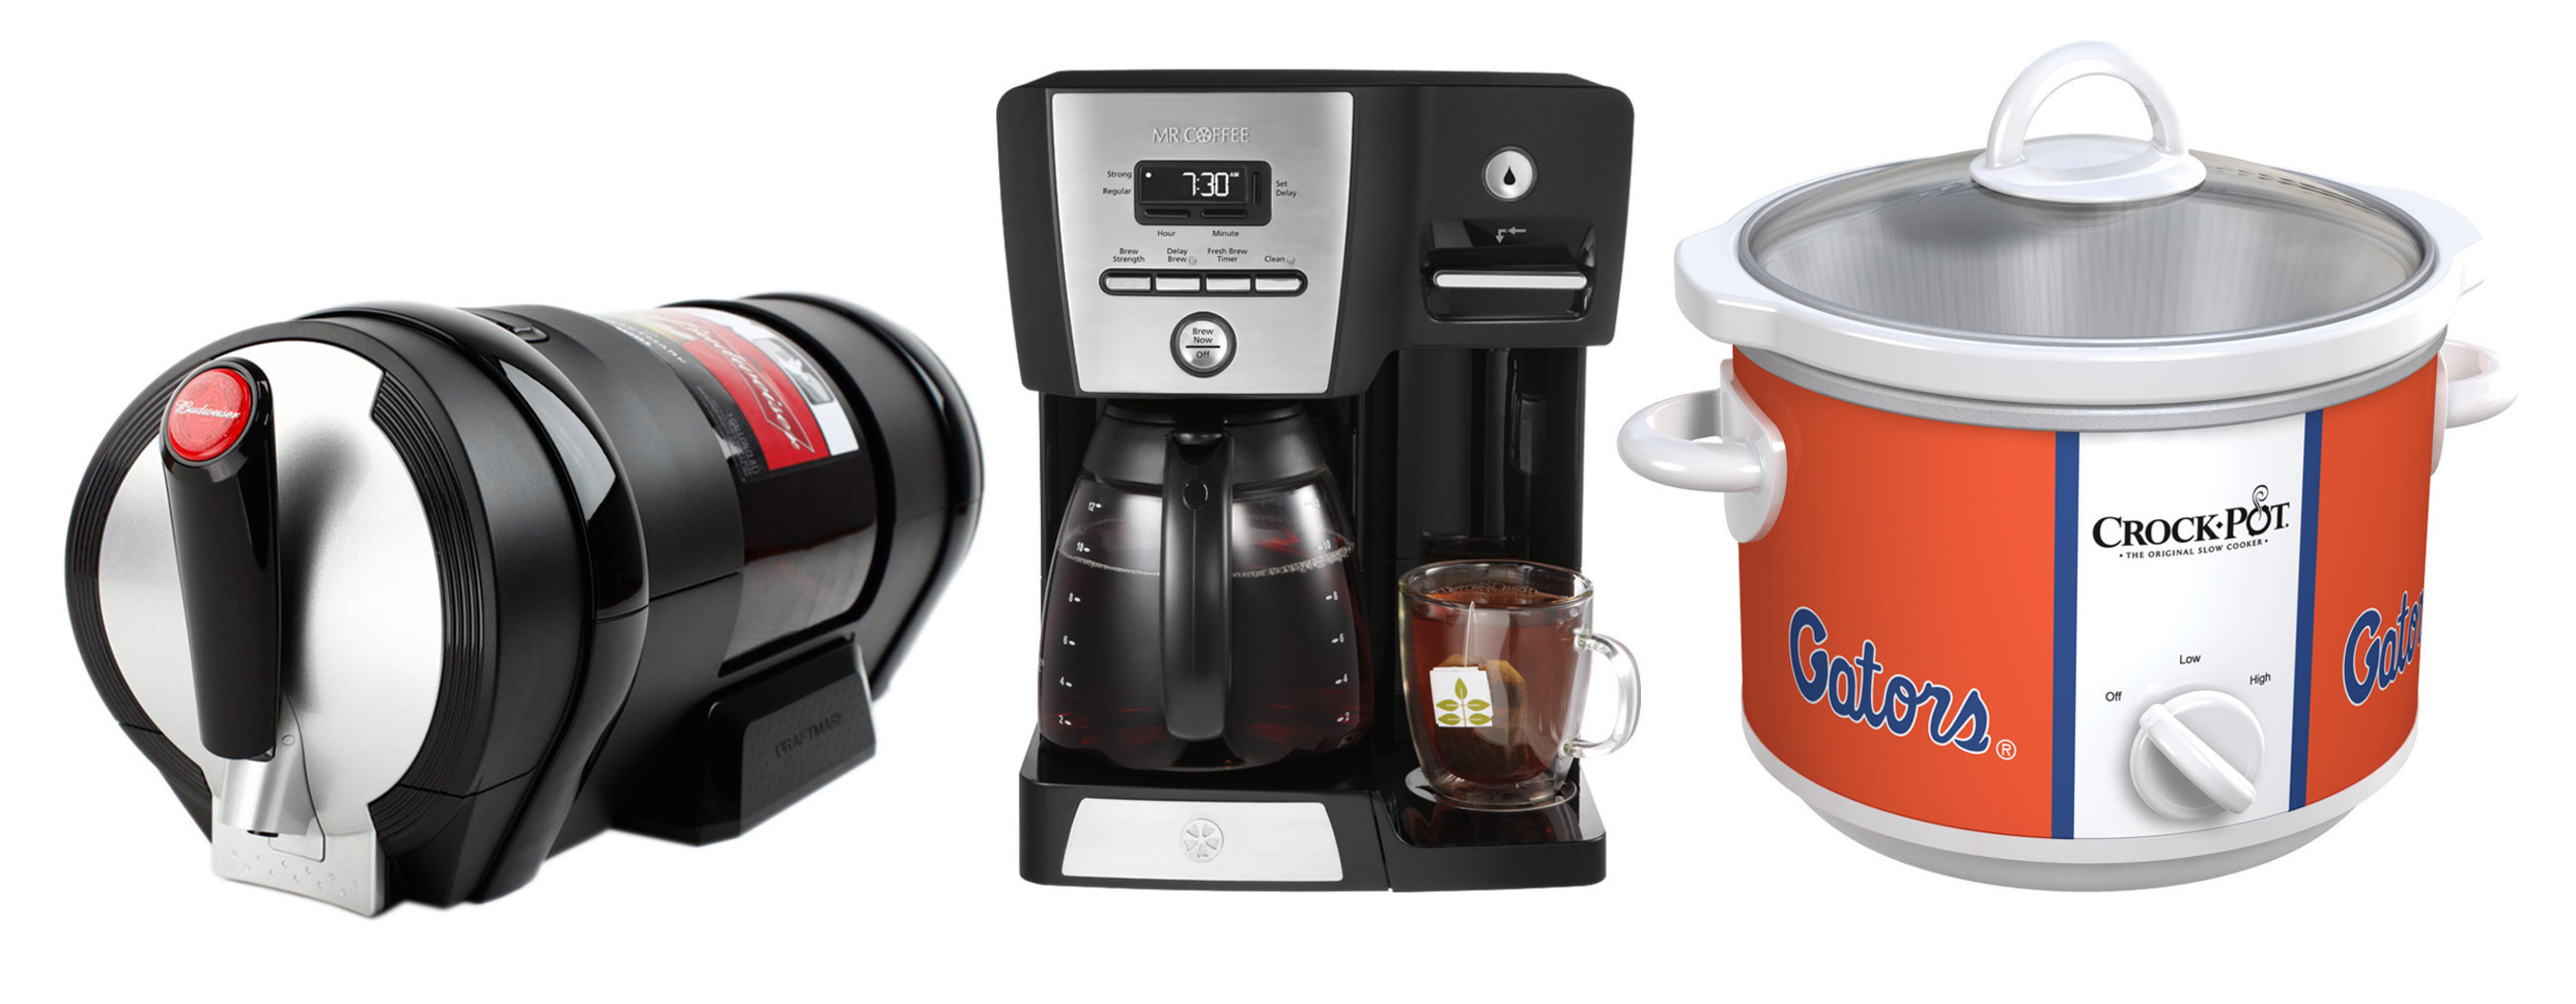 The Draftmark(R) Home Tap System, Mr. Coffee(R) Coffeemaker + Hot Shot Station(TM) and Crock-Pot(R) Collegiate Slow Cooker all create a "dream dorm" for consumers. (PRNewsFoto/Jarden Corporation)